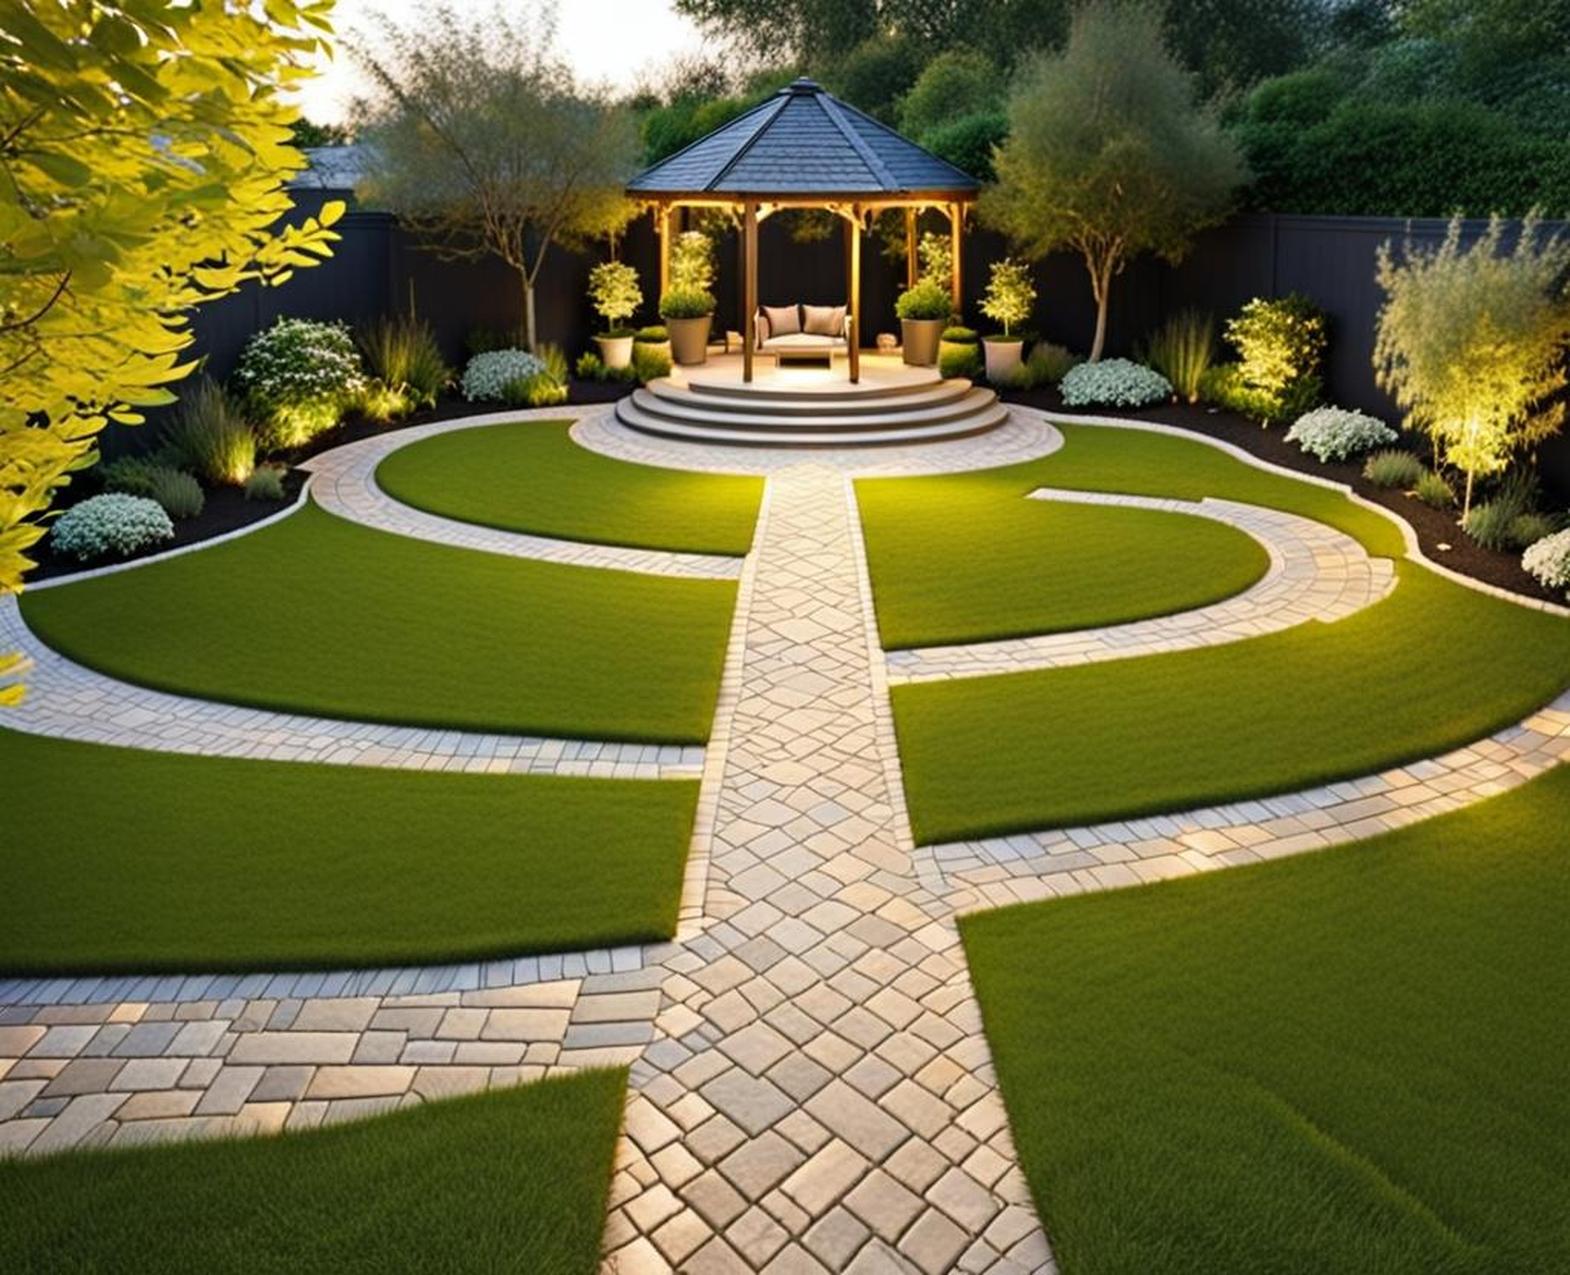 Give Your Garden Pathways a Dramatic Makeover This Spring